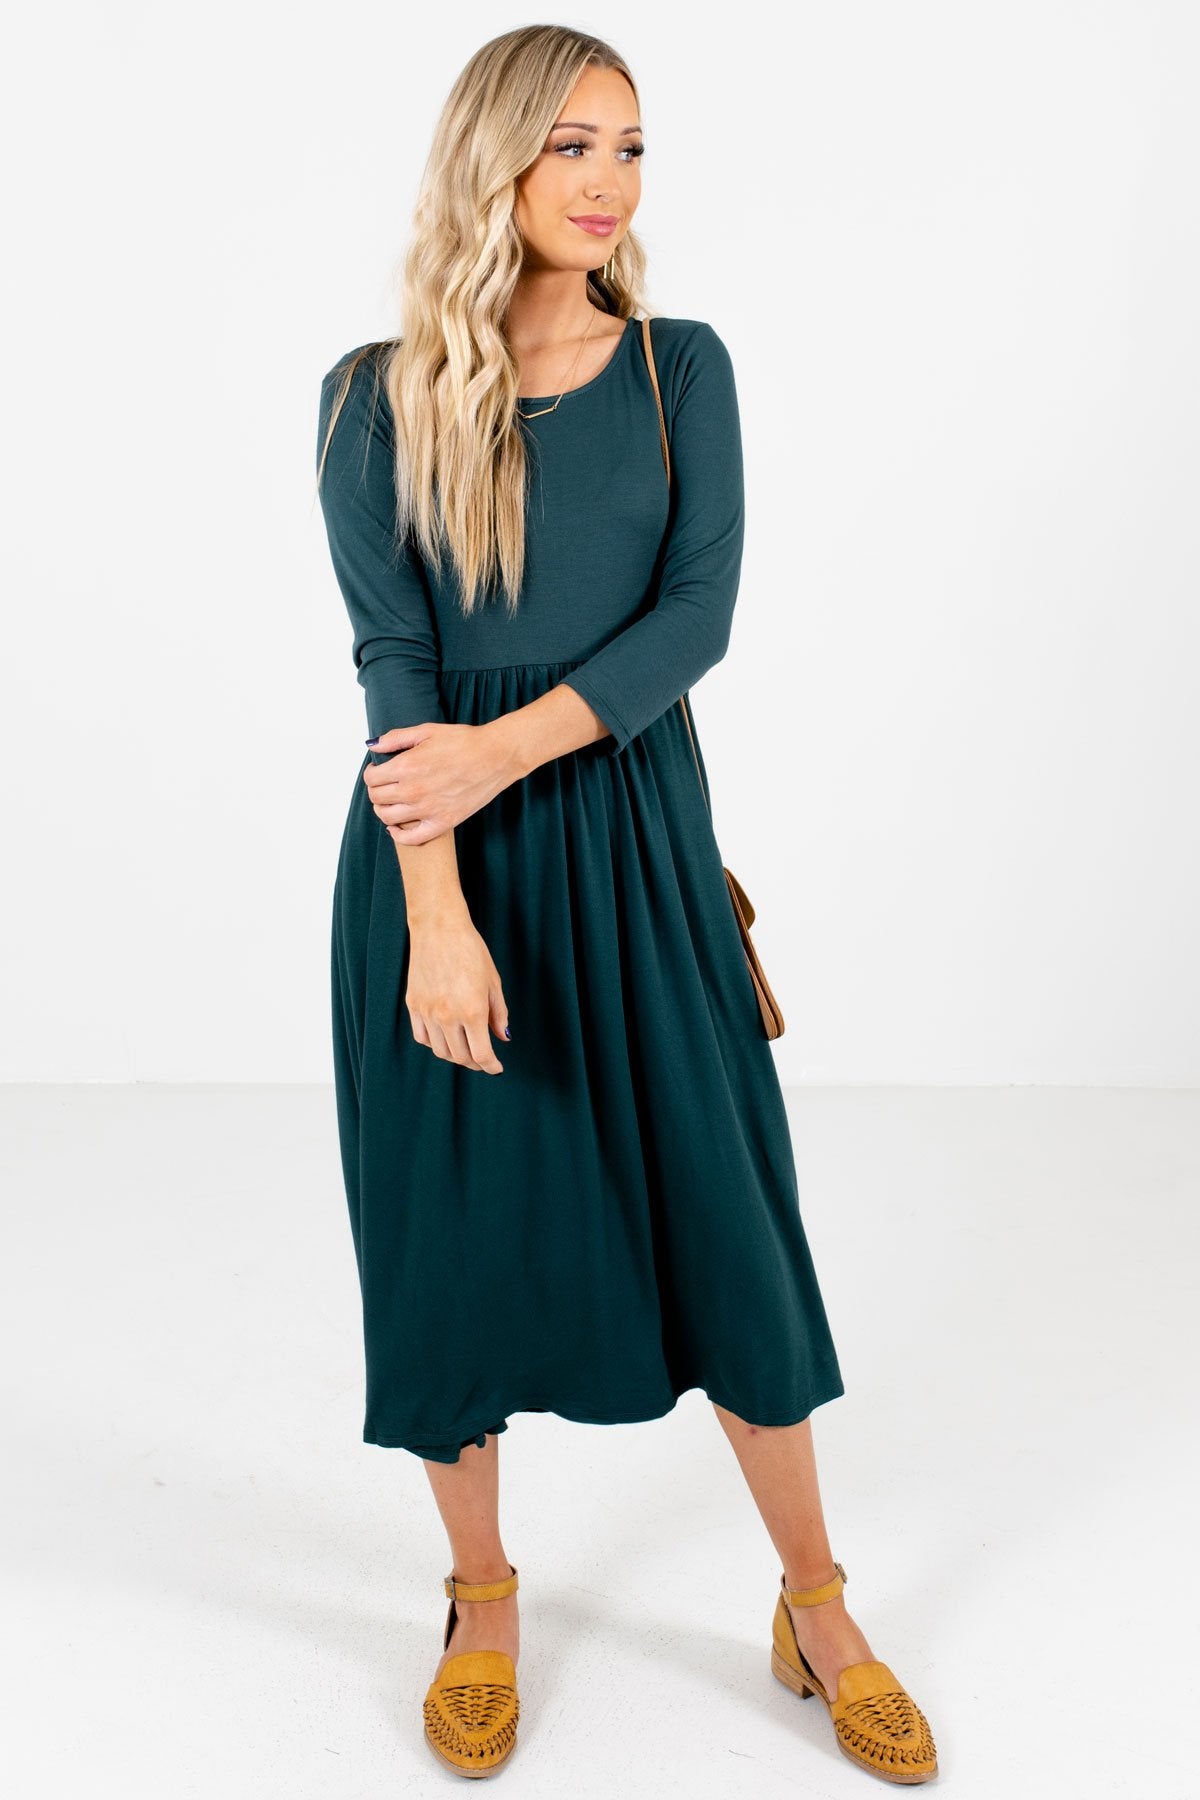 Teal Green Cute and Comfortable Boutique Midi Dresses for Women